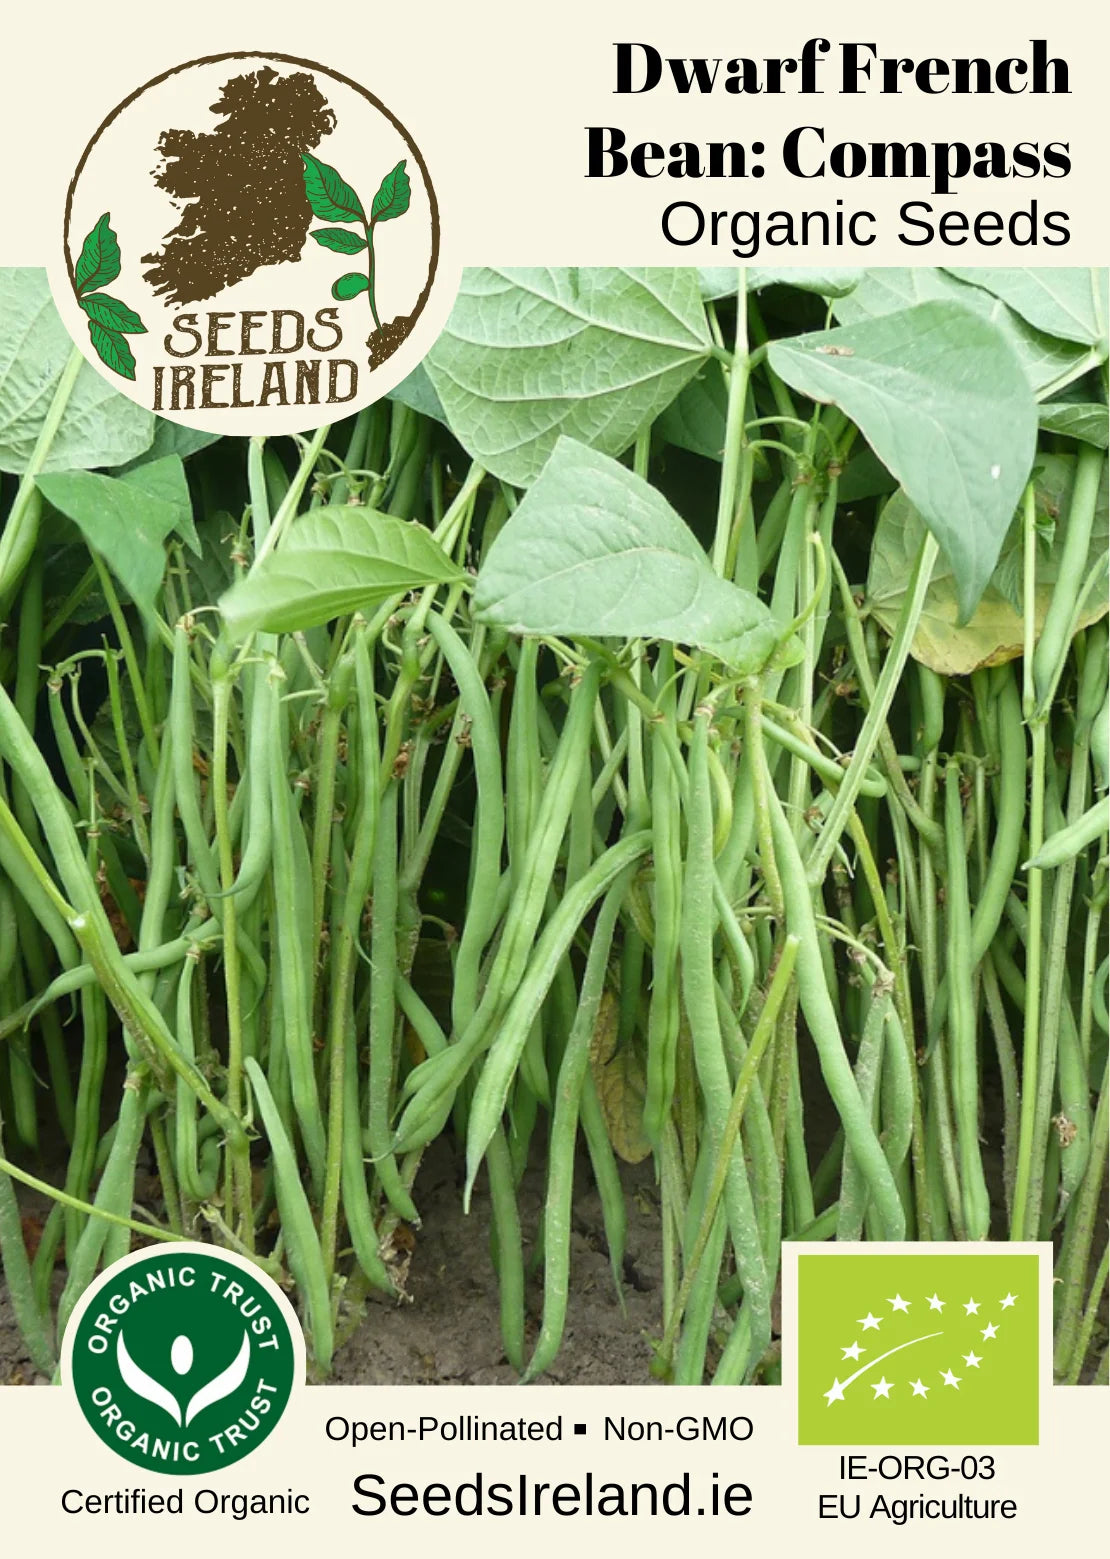 Dwarf French Bean Compass Seeds Ireland | Organic Vegetable Seed